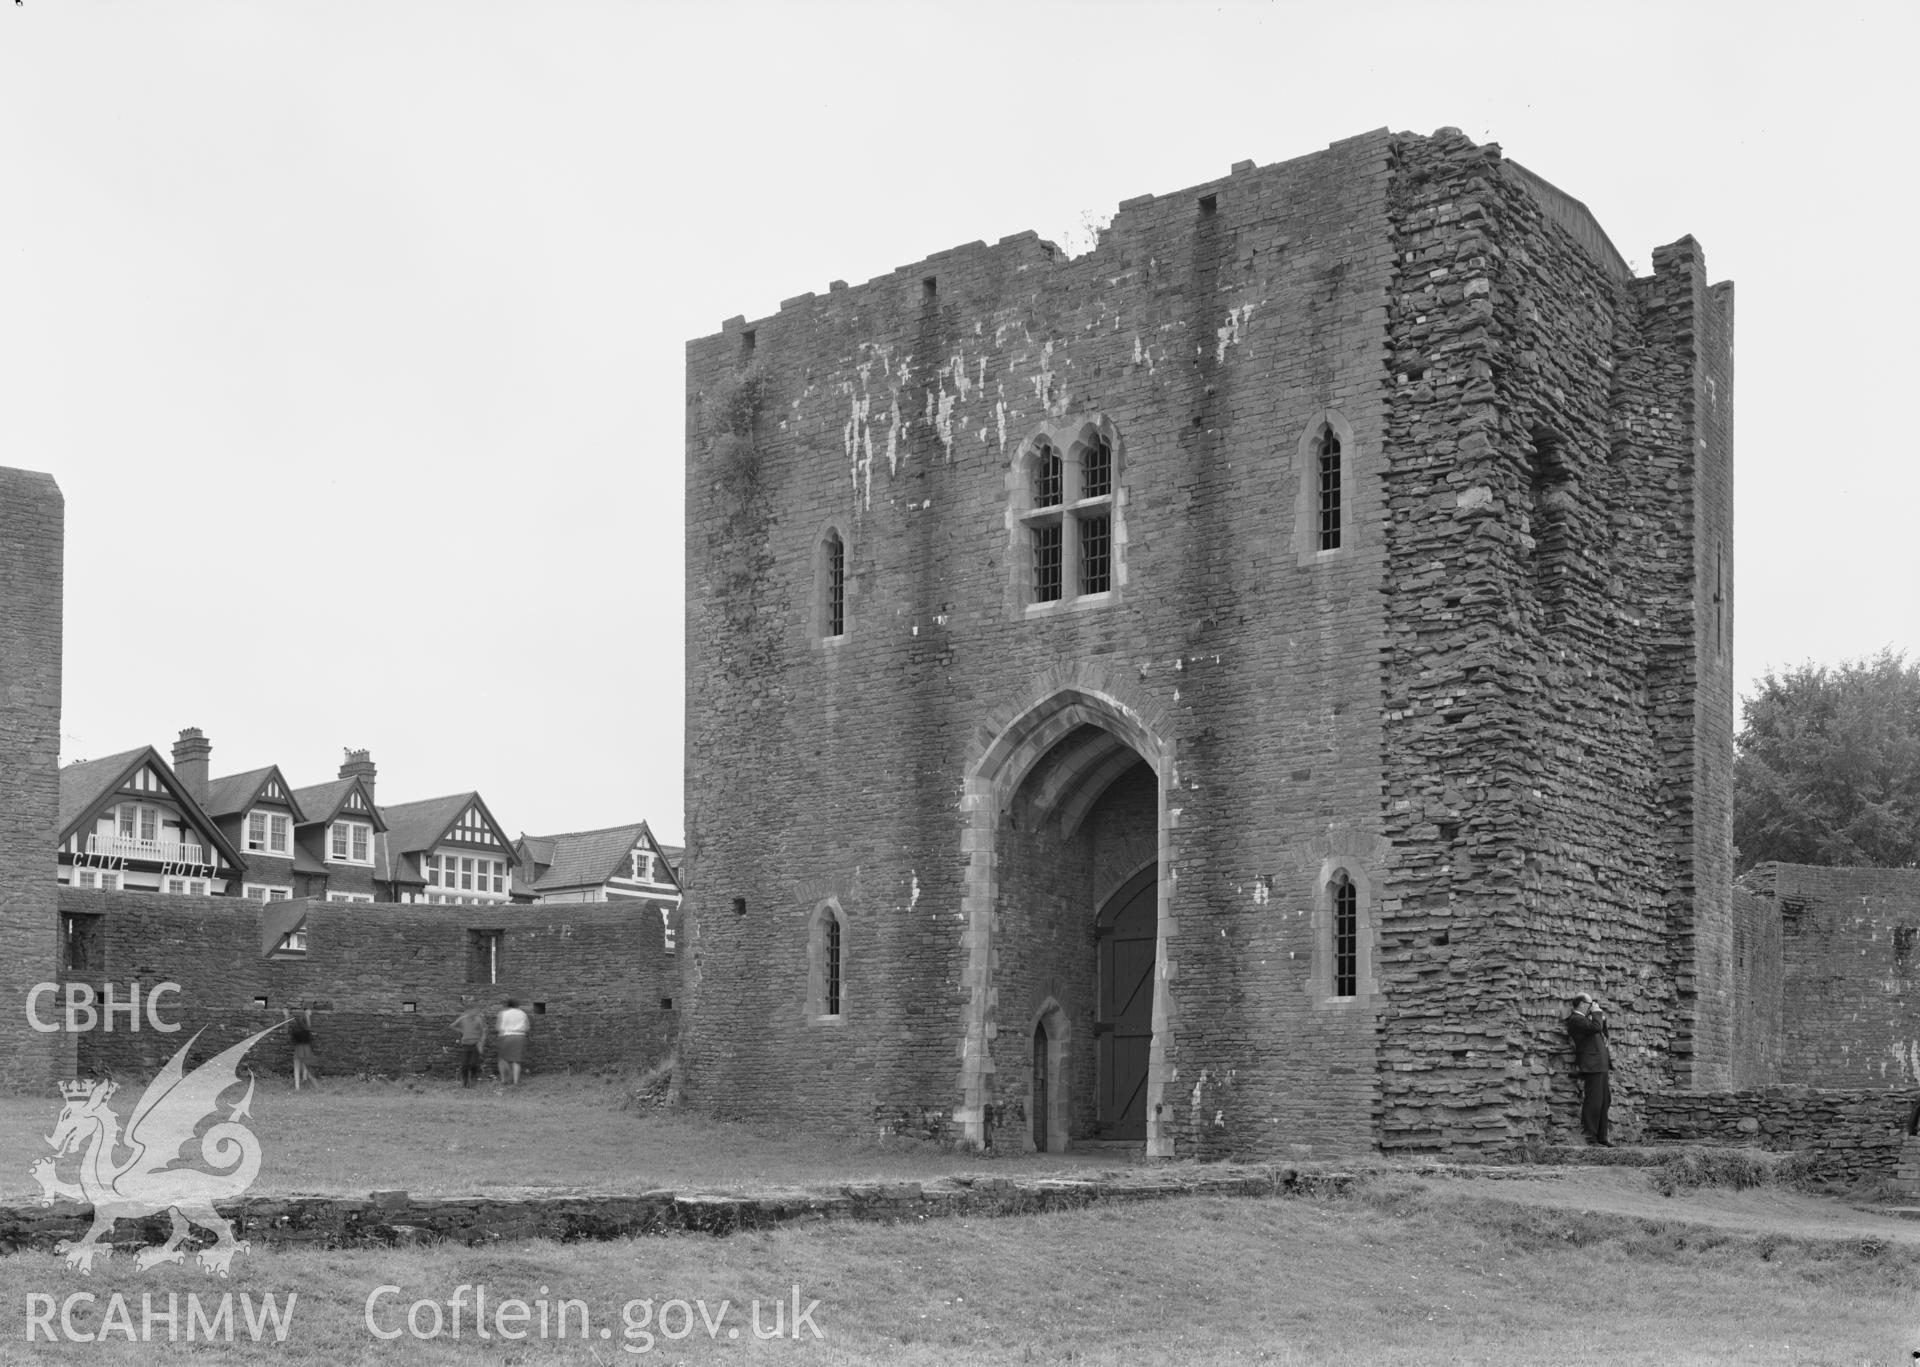 D.O.E photograph of Caerphilly Castle - south platform, south gate from north east.